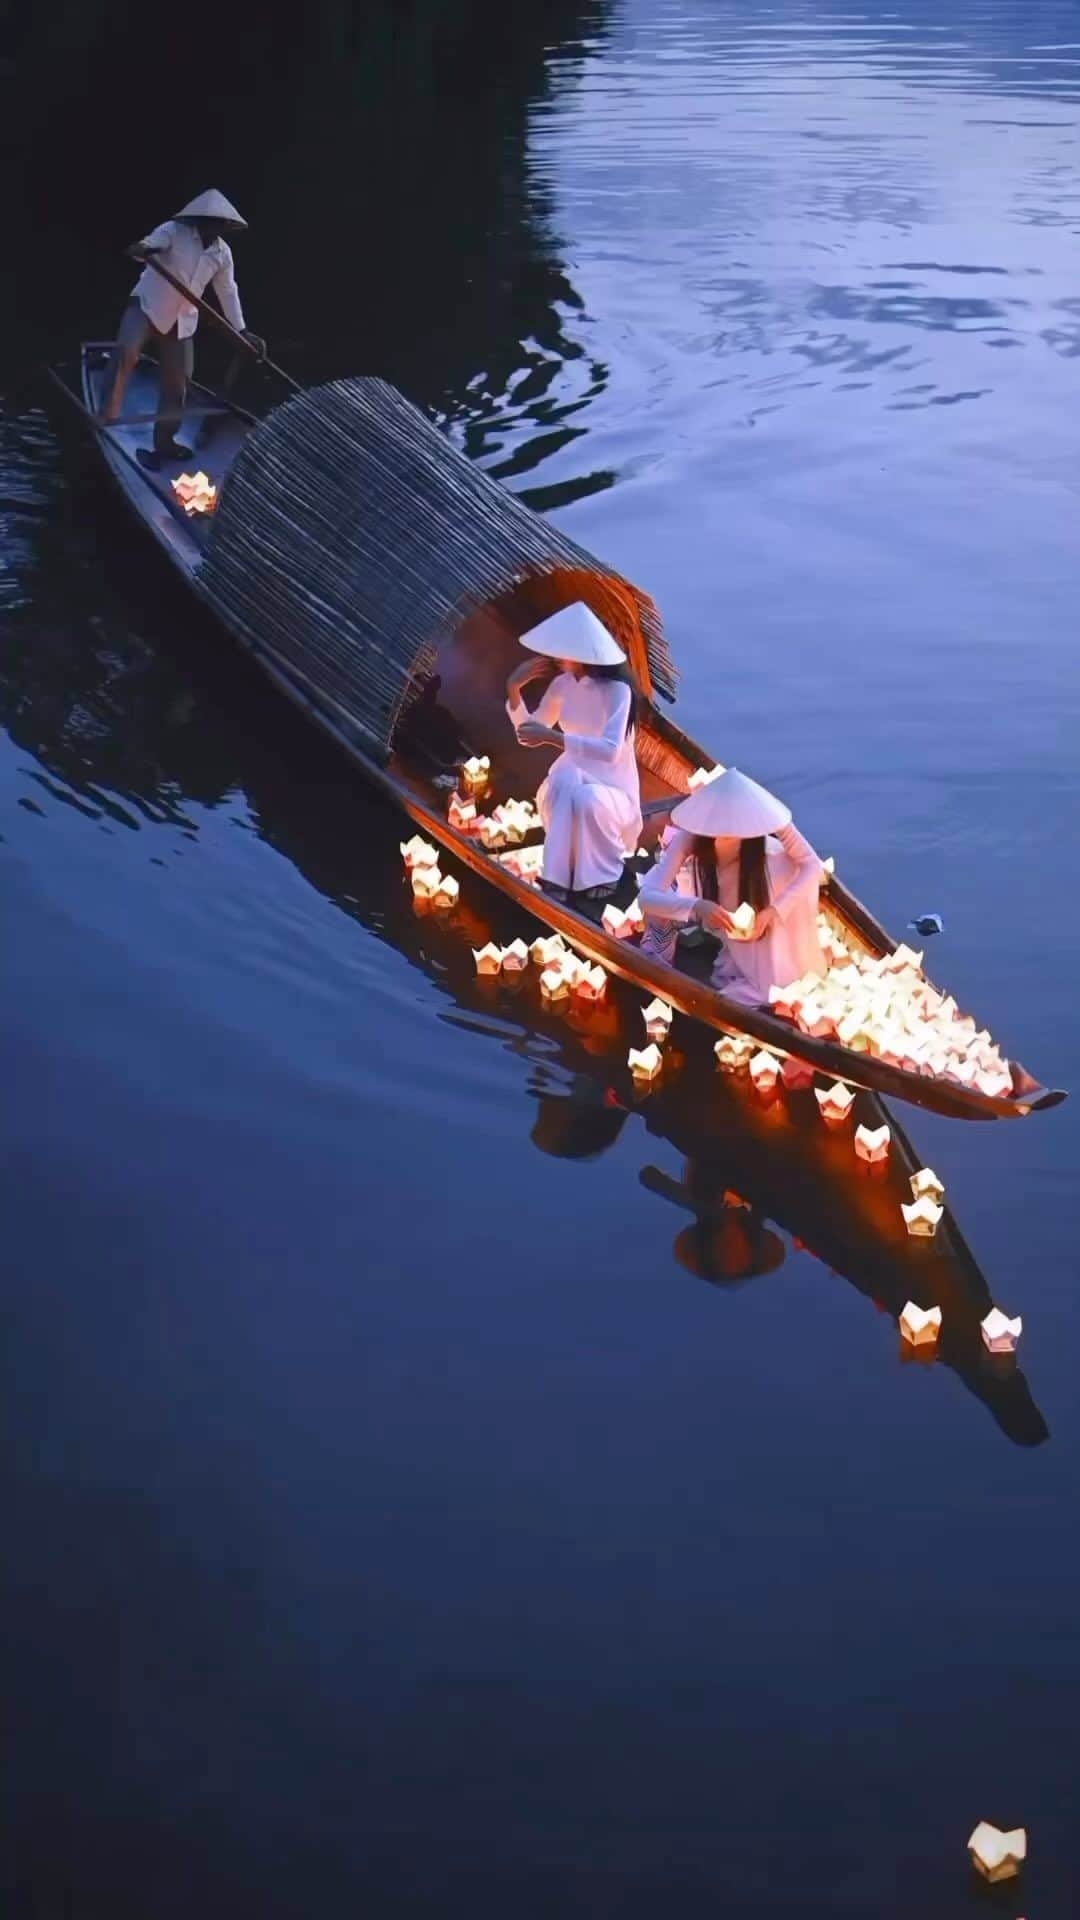 Instagramersのインスタグラム：「@igerstube shared this wonderful video by @danielkordan 😍🙌🏻✨  On the tranquil waters of Hue’s Hong River in Vietnam, young women don traditional garb to perform the sacred Candle Flower ritual. This age-old tradition, observed during major holidays and festivals, honors Vietnam’s spiritual values and culture. Each lit flower-shaped lamp represents a prayer for health and peace, creating a captivating spectacle that beautifully embodies the essence of Vietnam’s heritage. #hue #vietnam #hoian #hanoi #danang special thanks to @vietsui for arrangements #igerstube #igers」